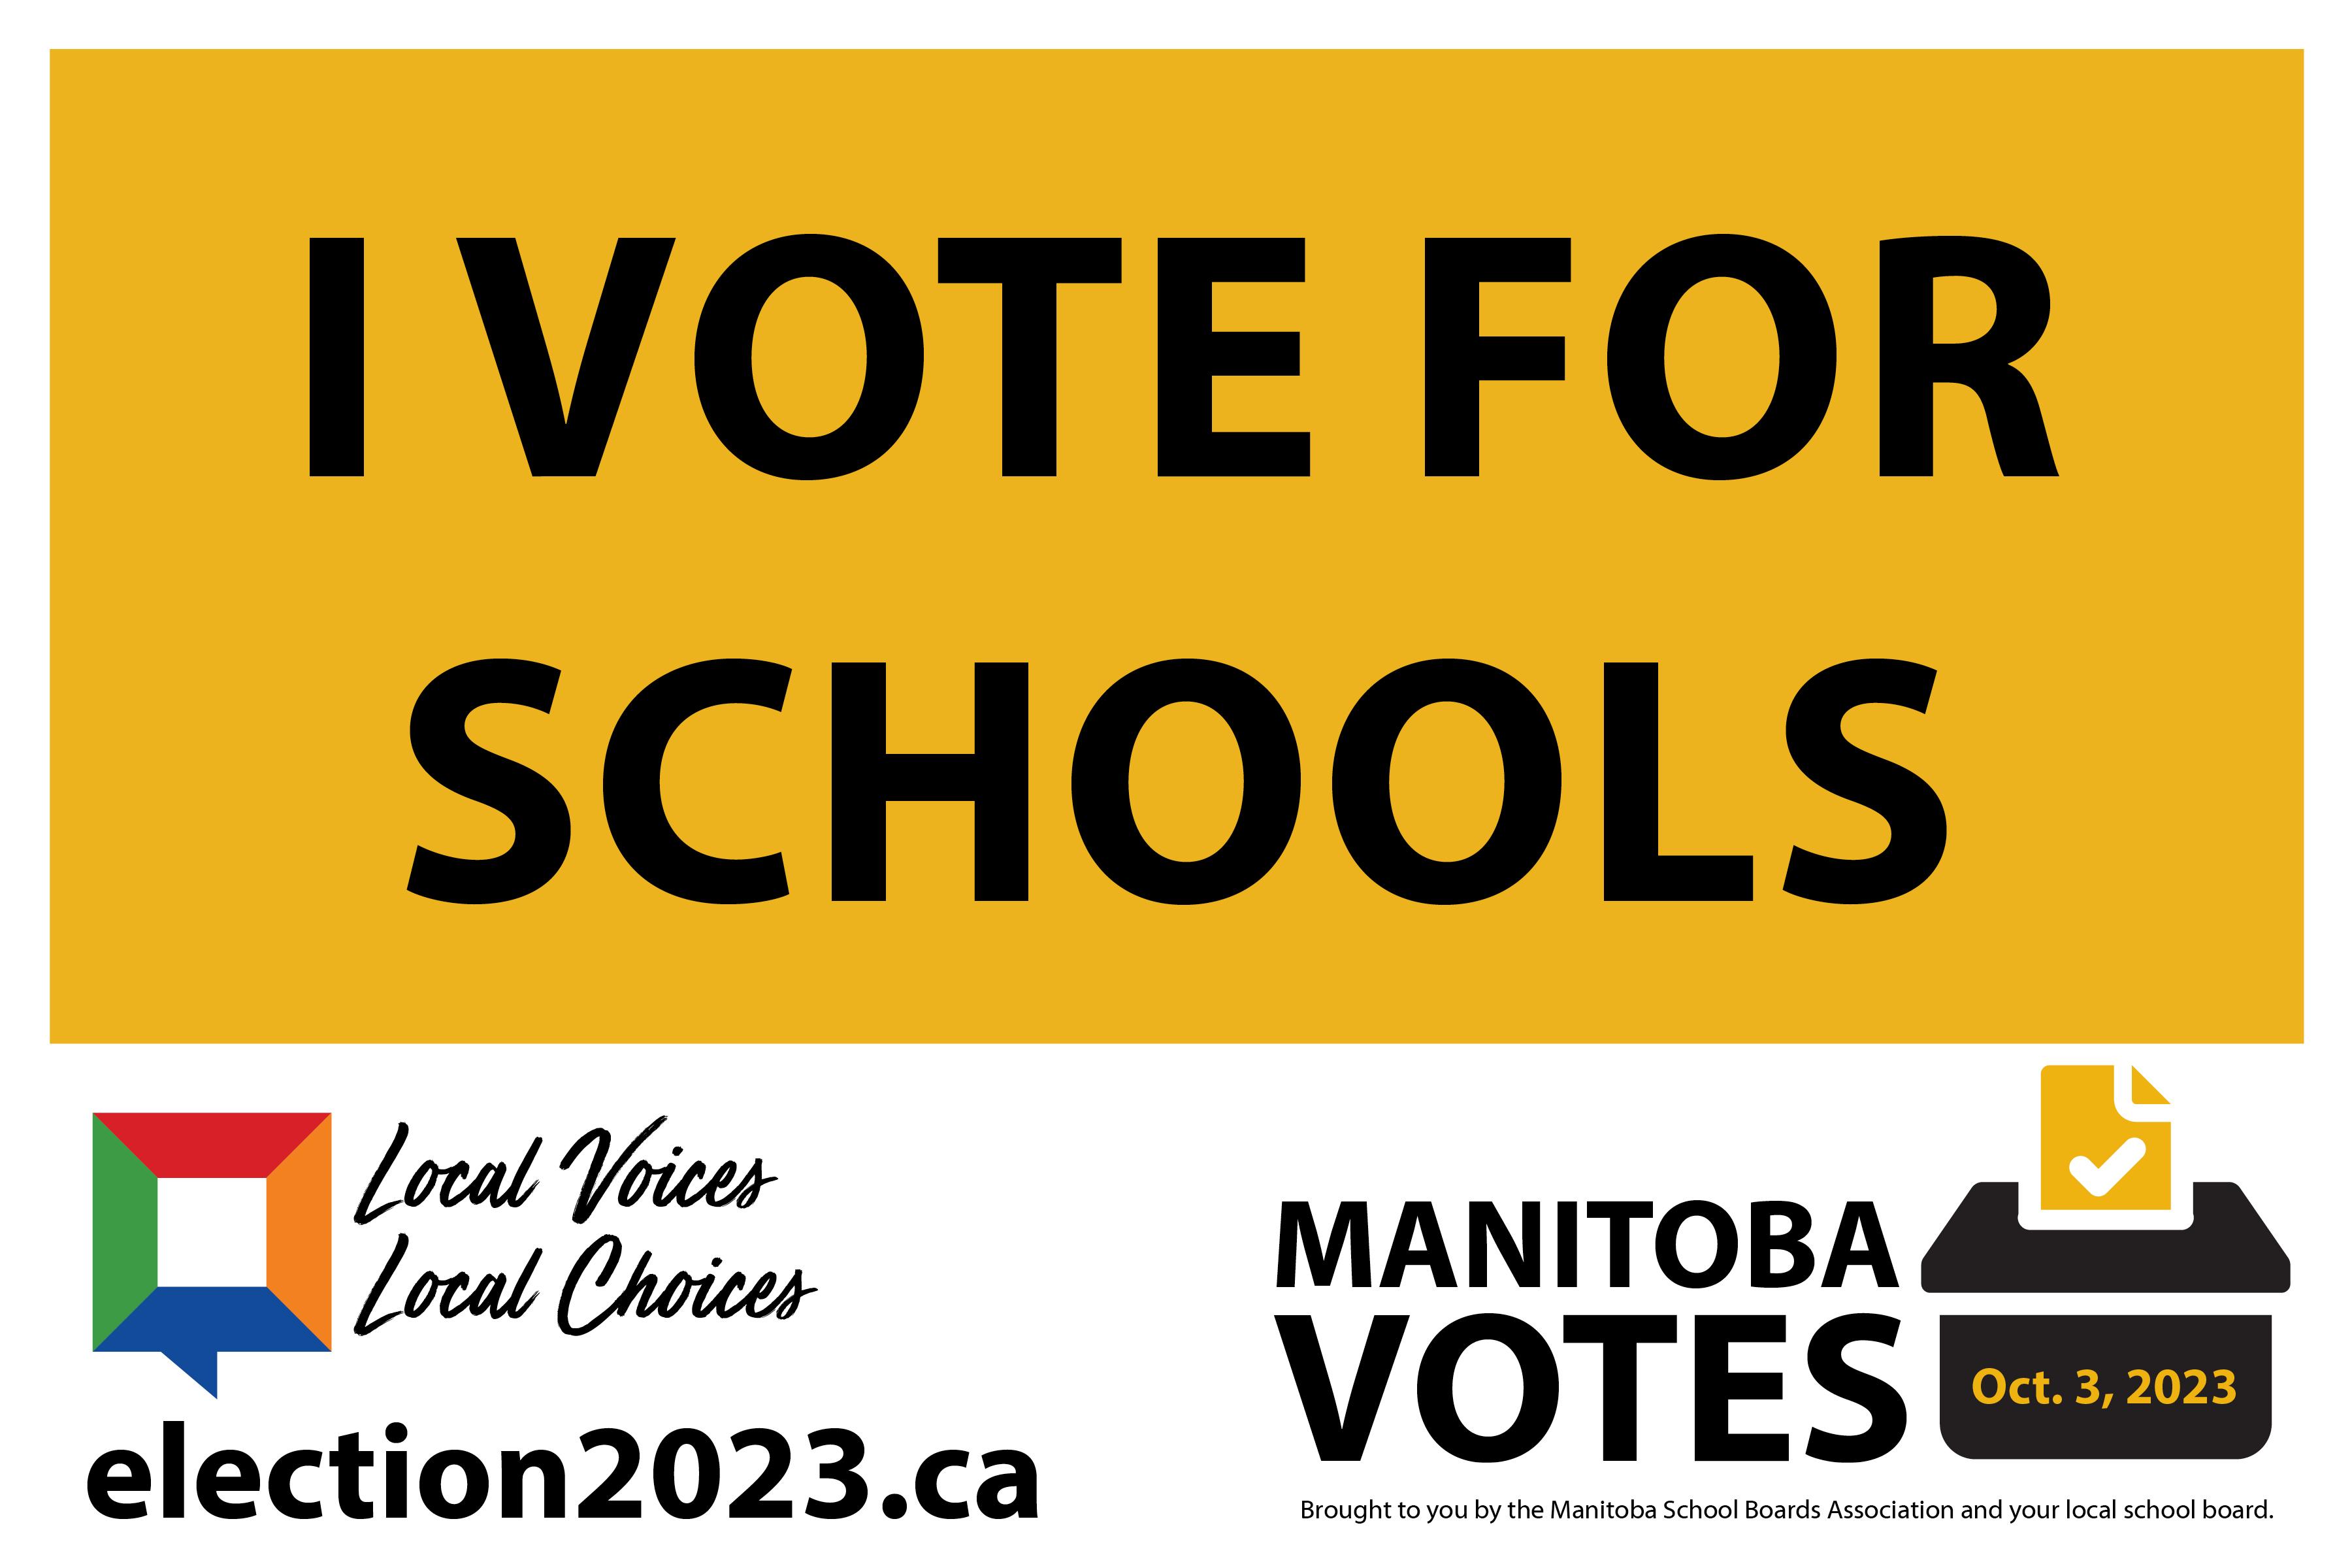 I Vote for Schools lawn sign